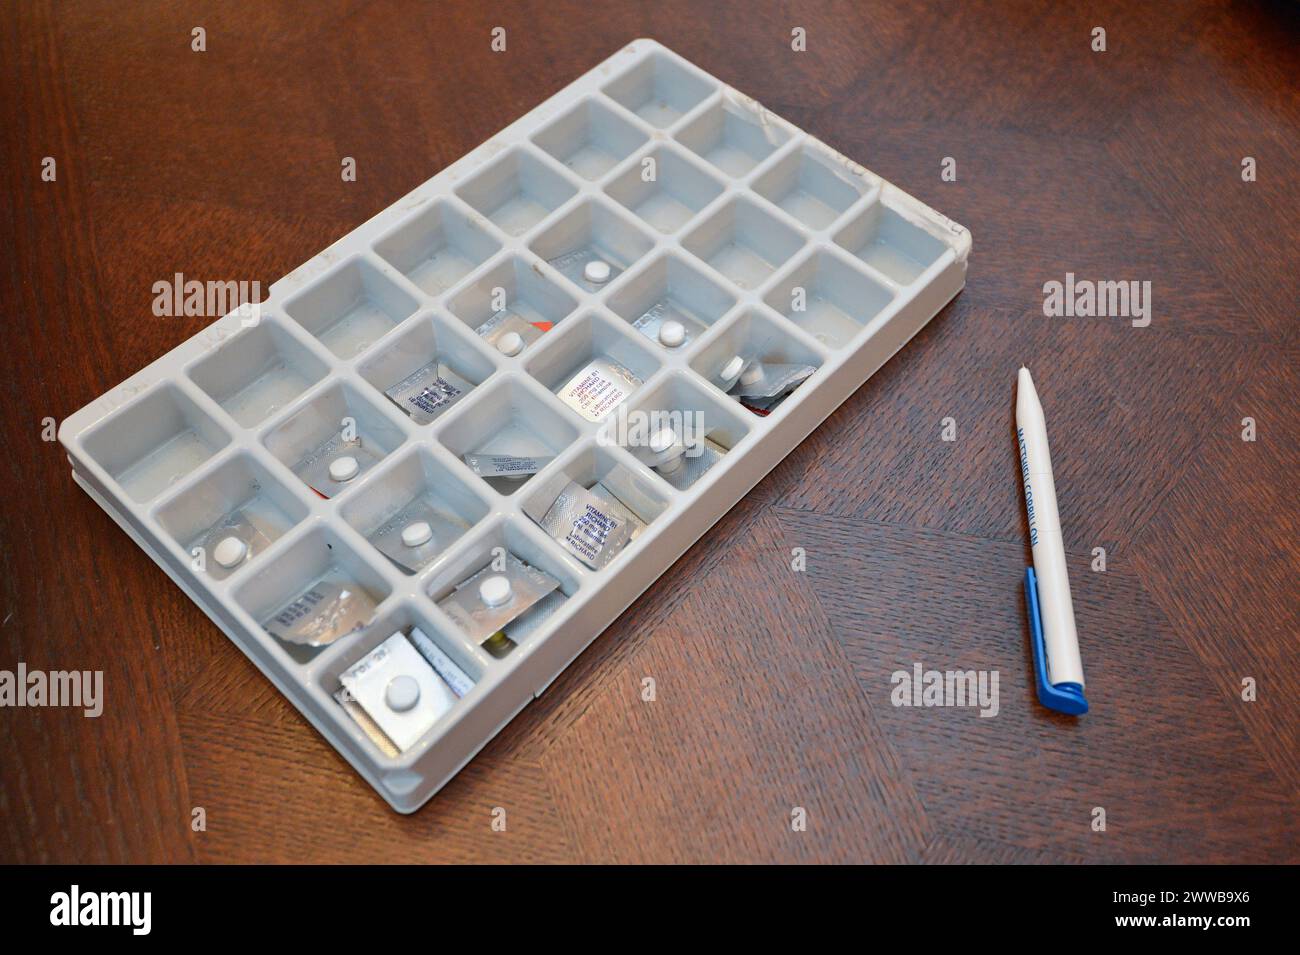 HAD (Hospitalization At Home). Follow-up of an elderly patient at home by a nurse. Pillbox and pen on a table. Stock Photo